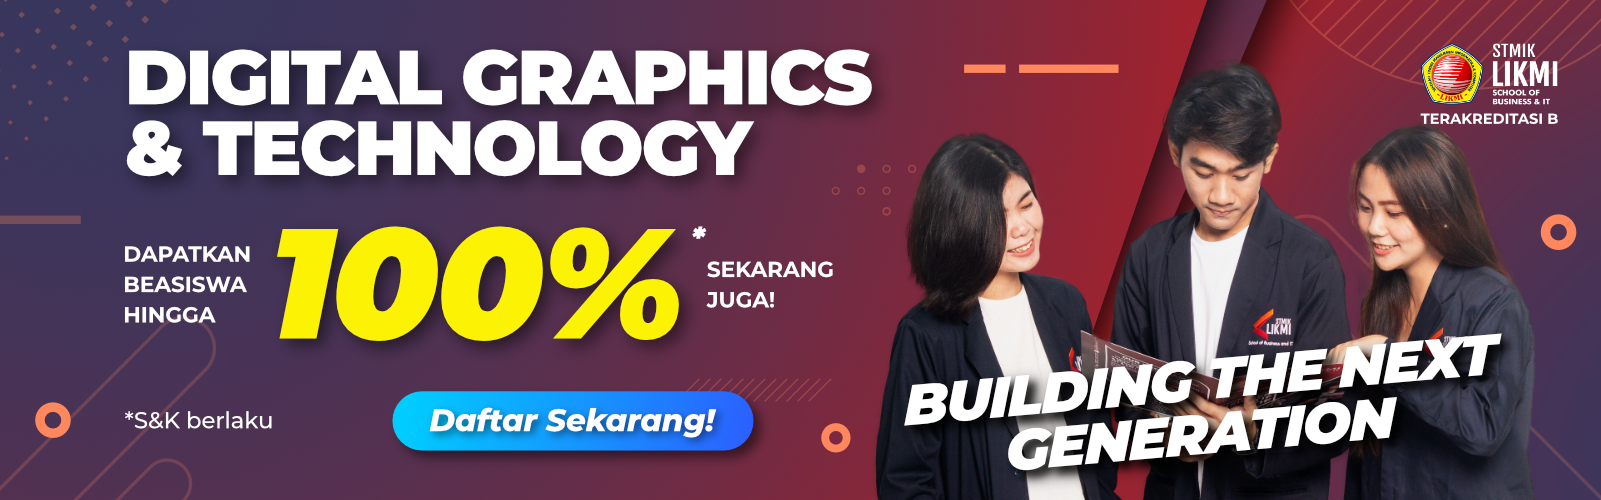 Digital Graphics and Technology